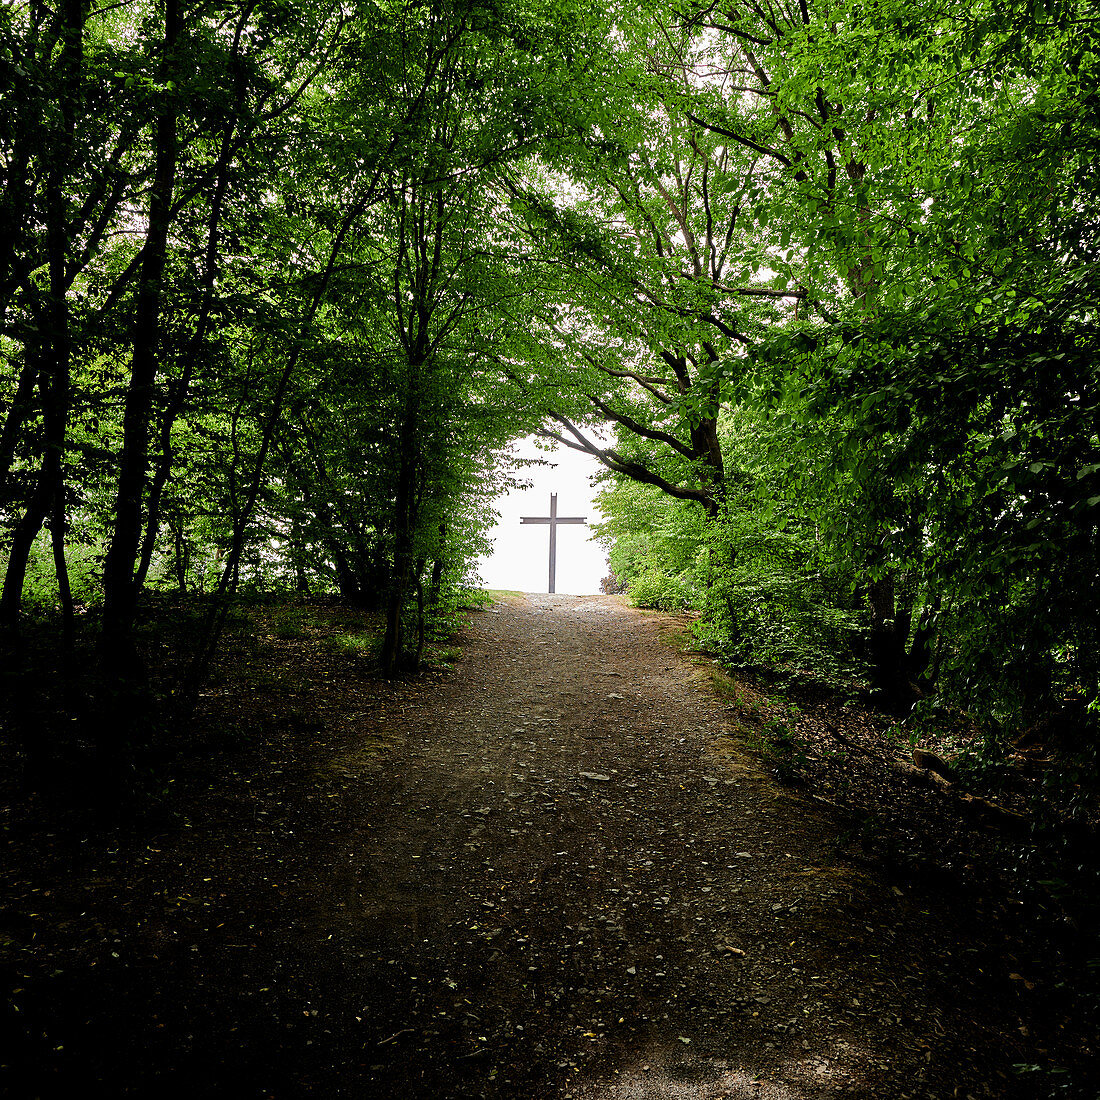 The cross at the end of the path, Koppelkreut, Rheinbreitbach, Germany